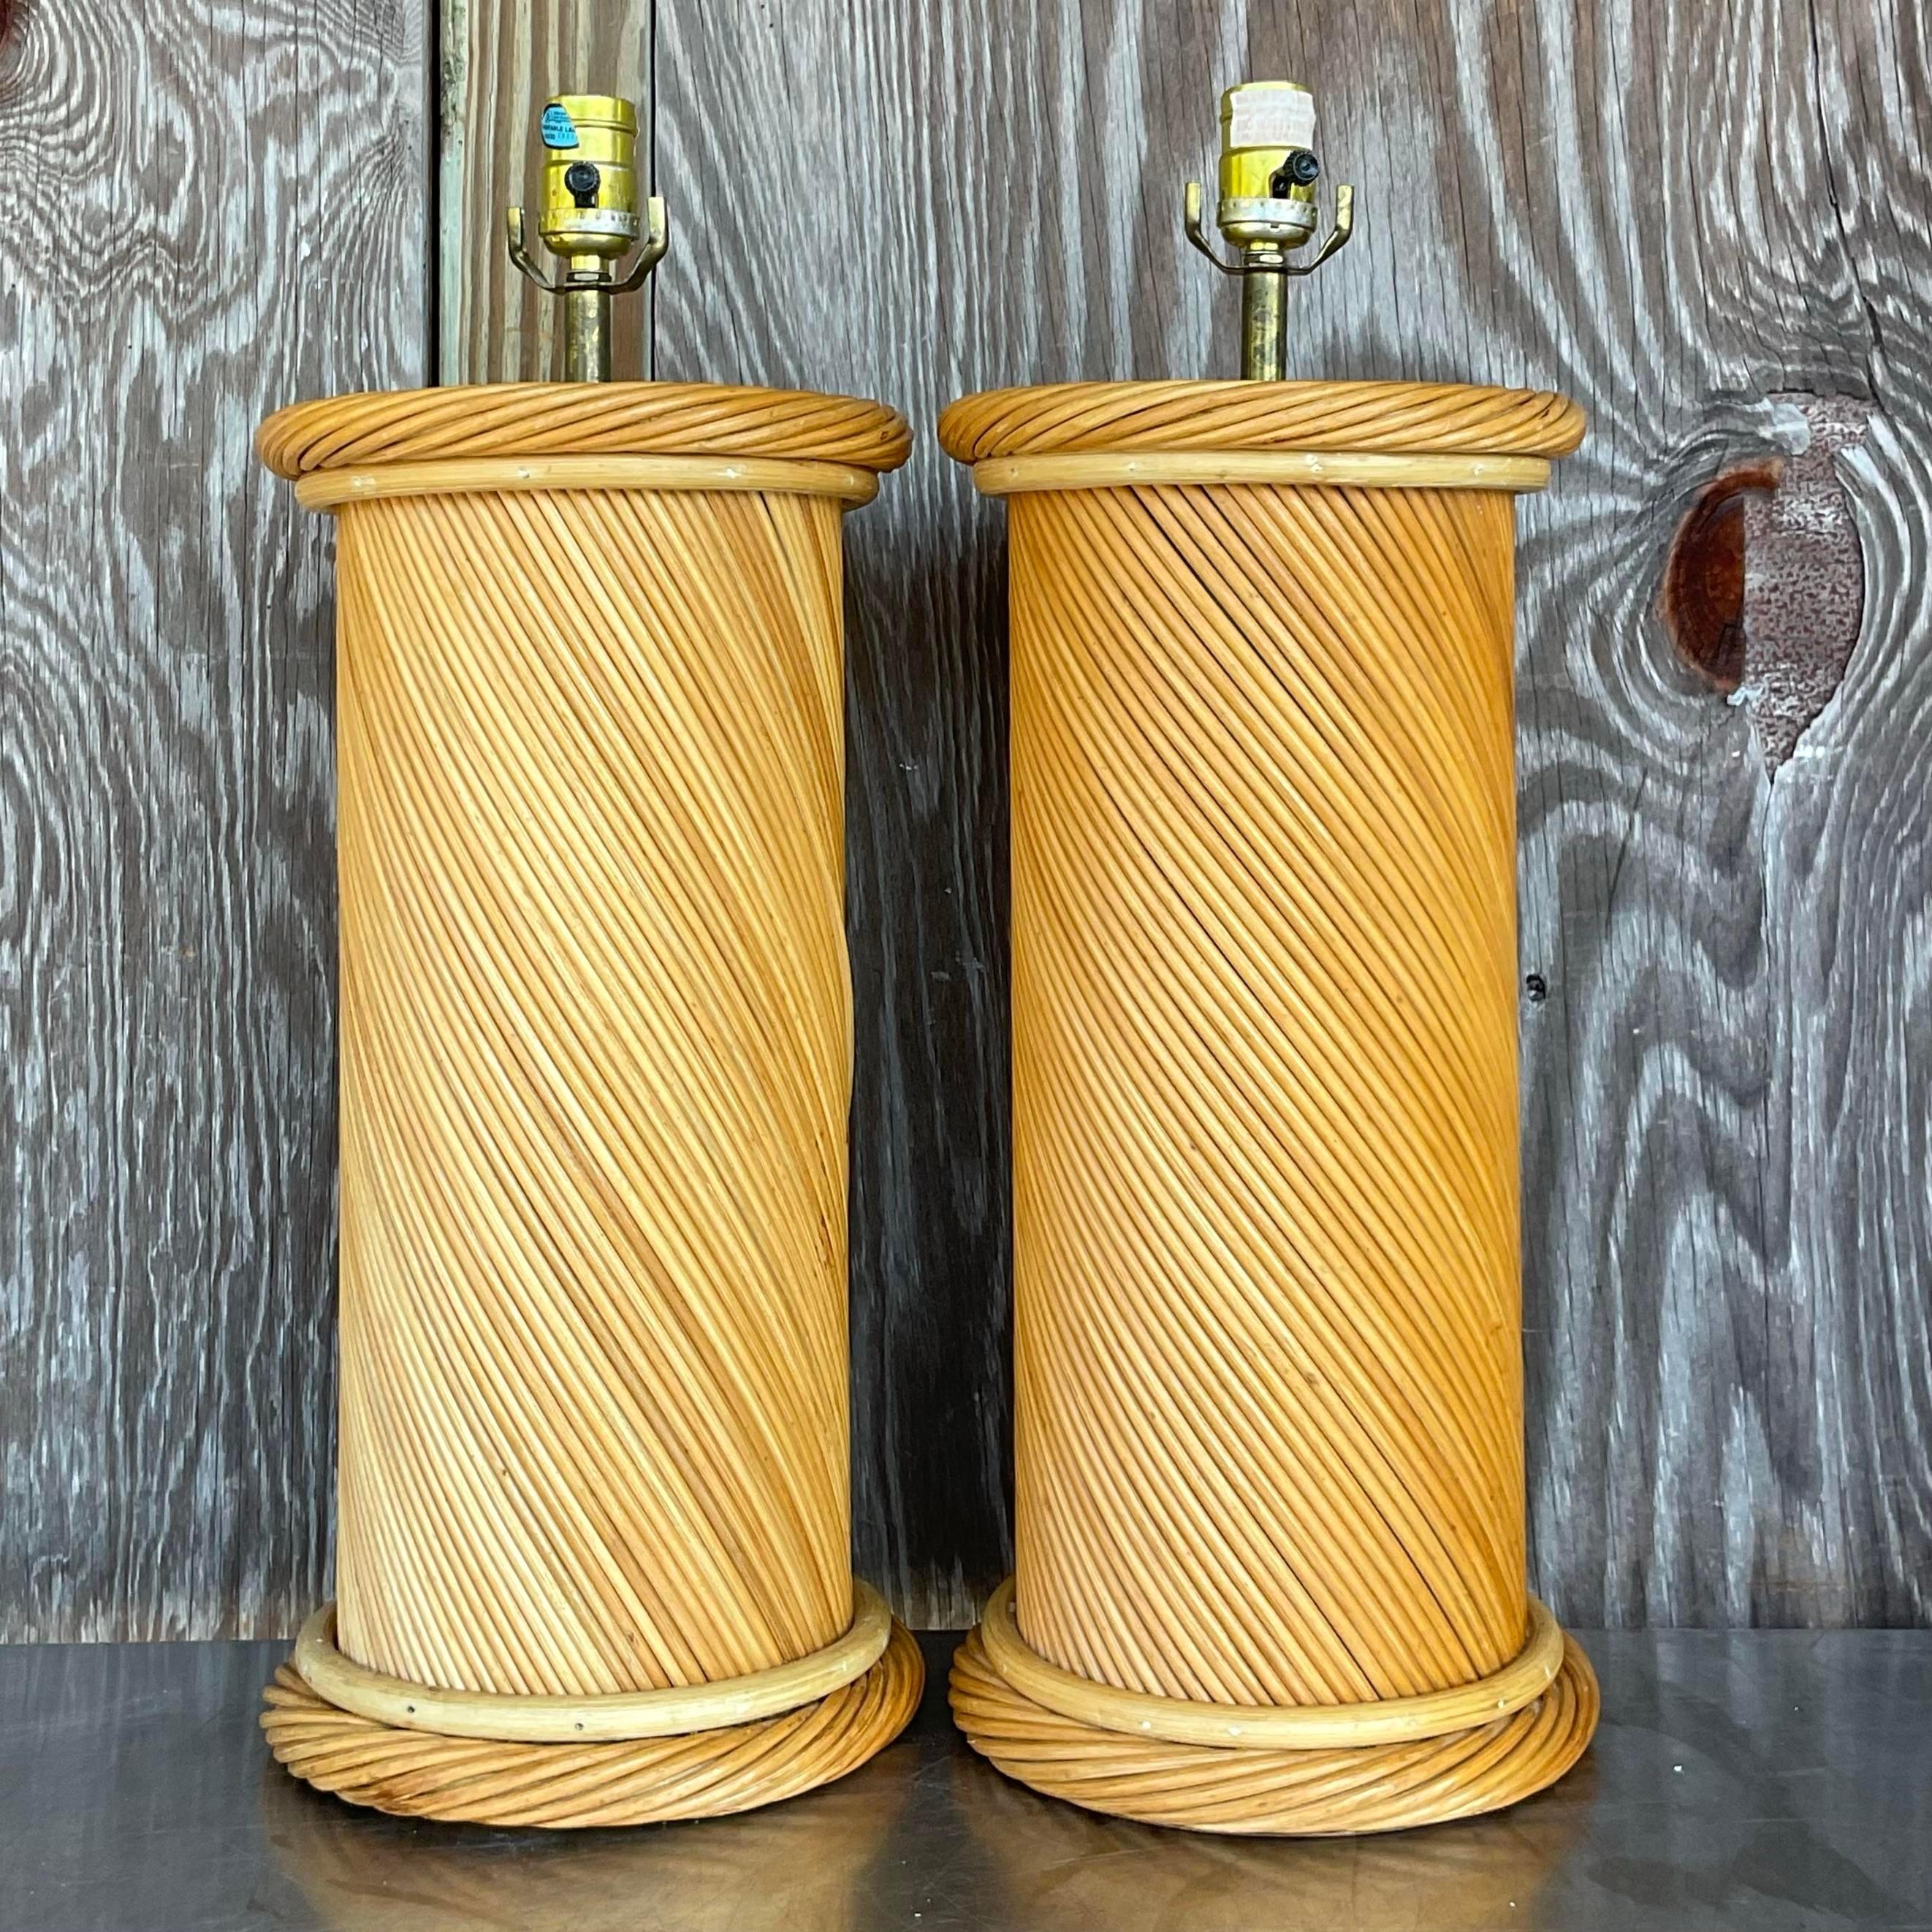 Philippine Vintage Coastal Twisted Pencil Reed Lamps - a Pair For Sale